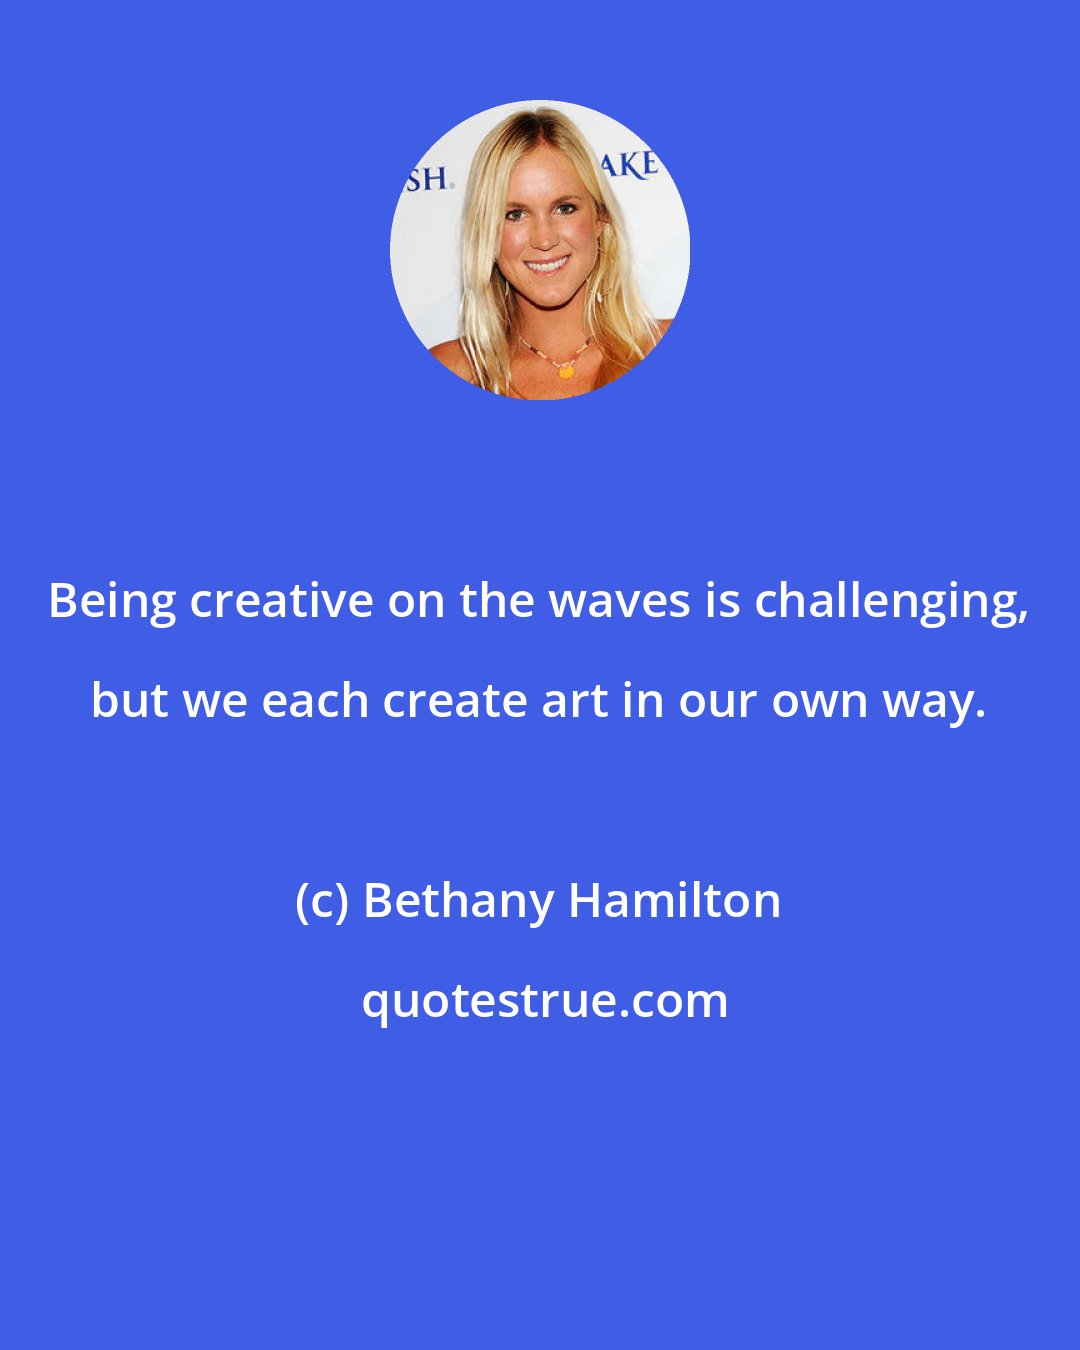 Bethany Hamilton: Being creative on the waves is challenging, but we each create art in our own way.